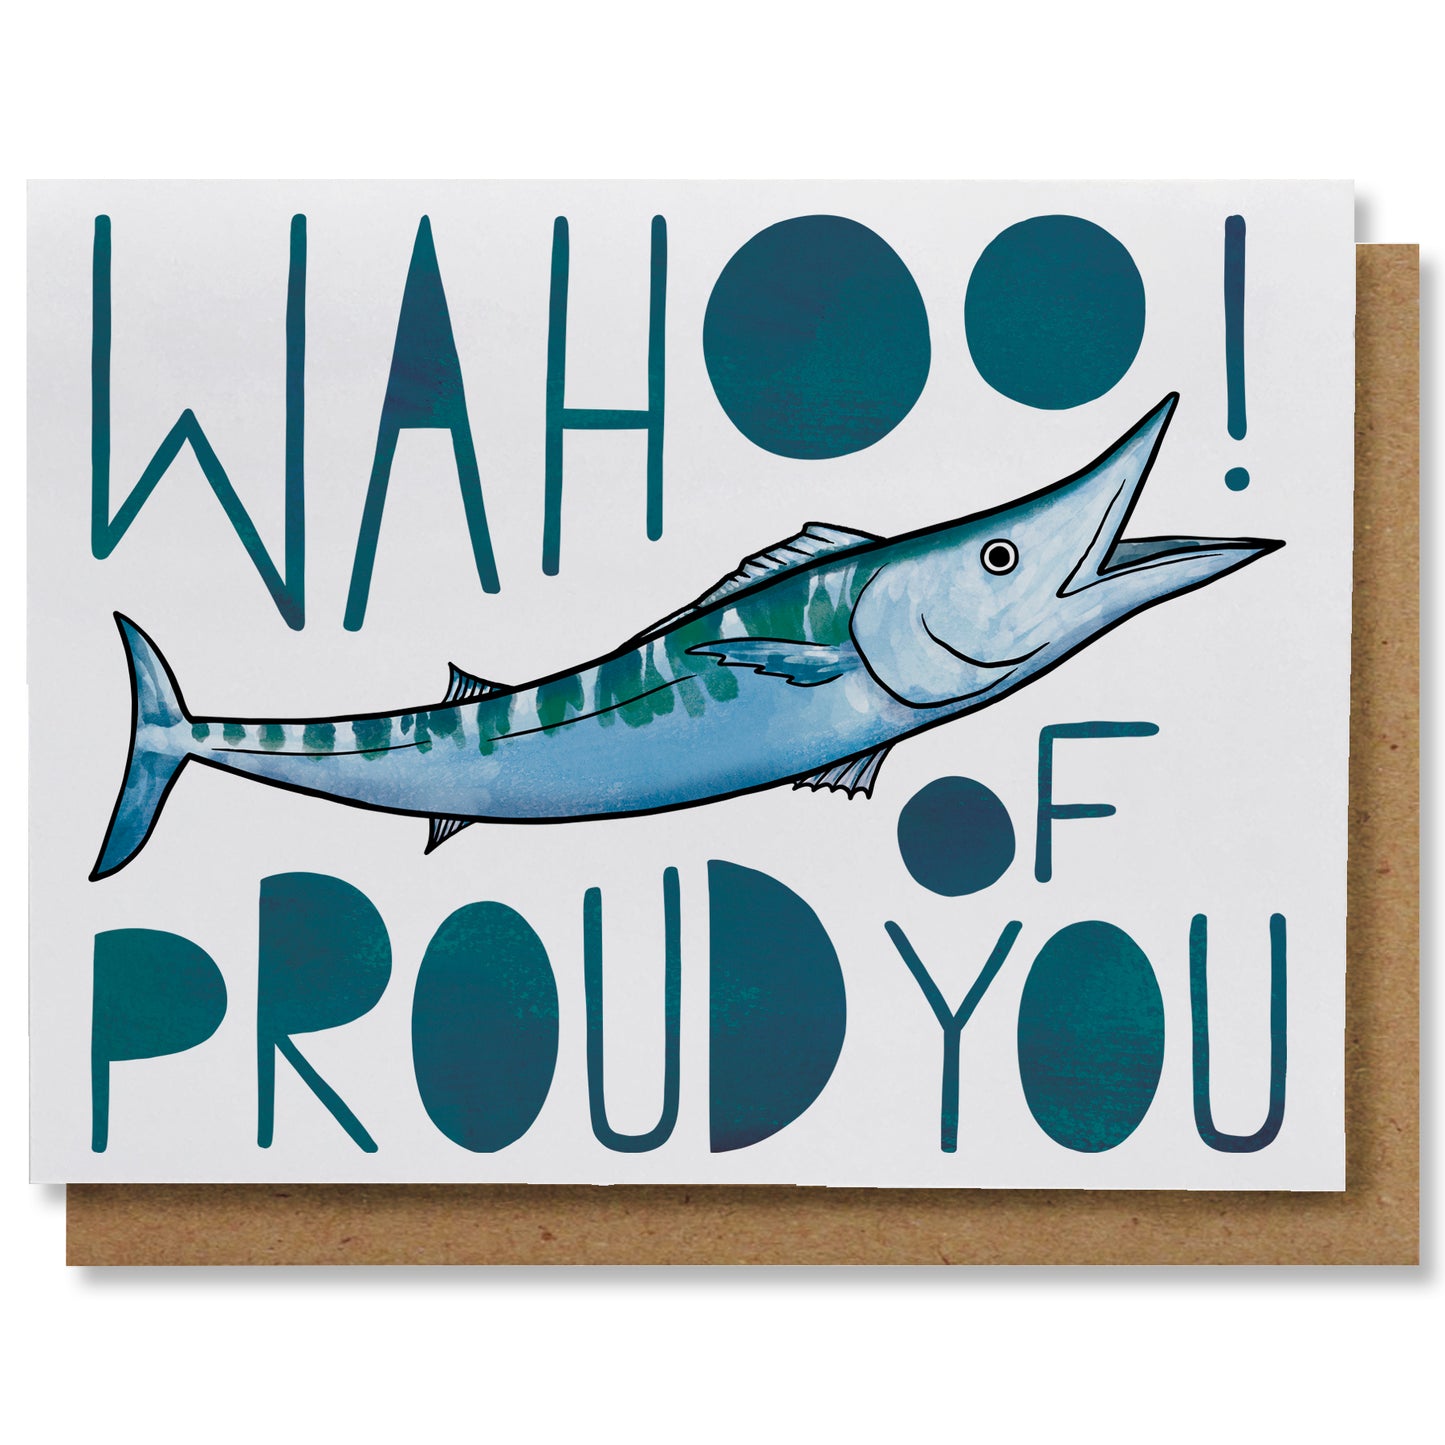 An illustrated greeting card featuring a blue fish with the caption "Wahoo! Proud of you"